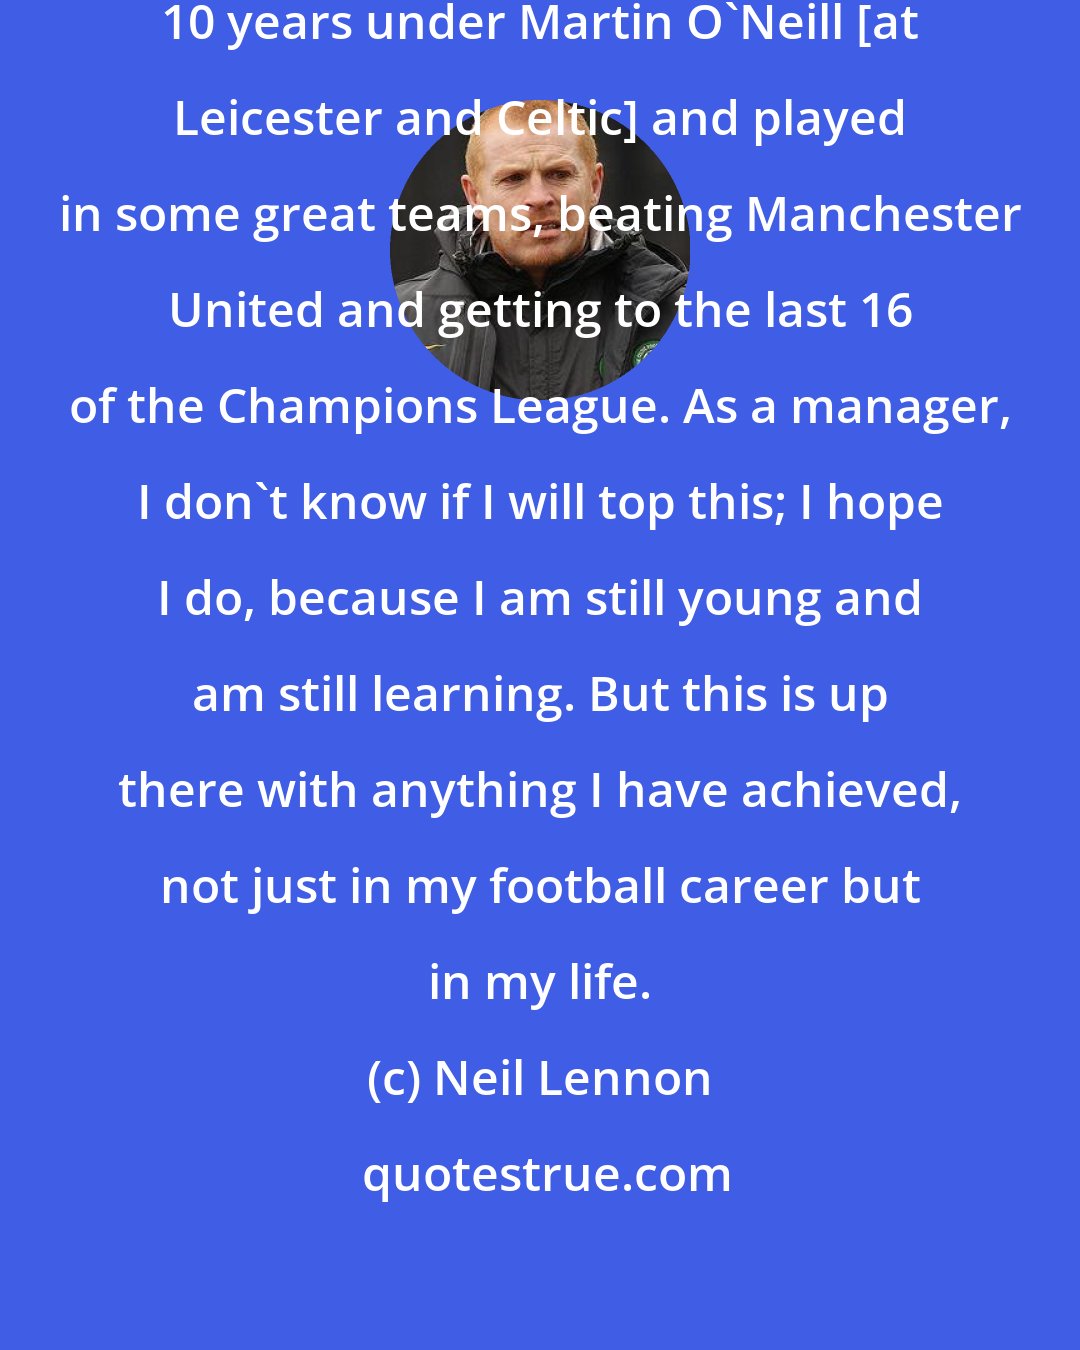 Neil Lennon: As a player I won things, had a special 10 years under Martin O'Neill [at Leicester and Celtic] and played in some great teams, beating Manchester United and getting to the last 16 of the Champions League. As a manager, I don't know if I will top this; I hope I do, because I am still young and am still learning. But this is up there with anything I have achieved, not just in my football career but in my life.